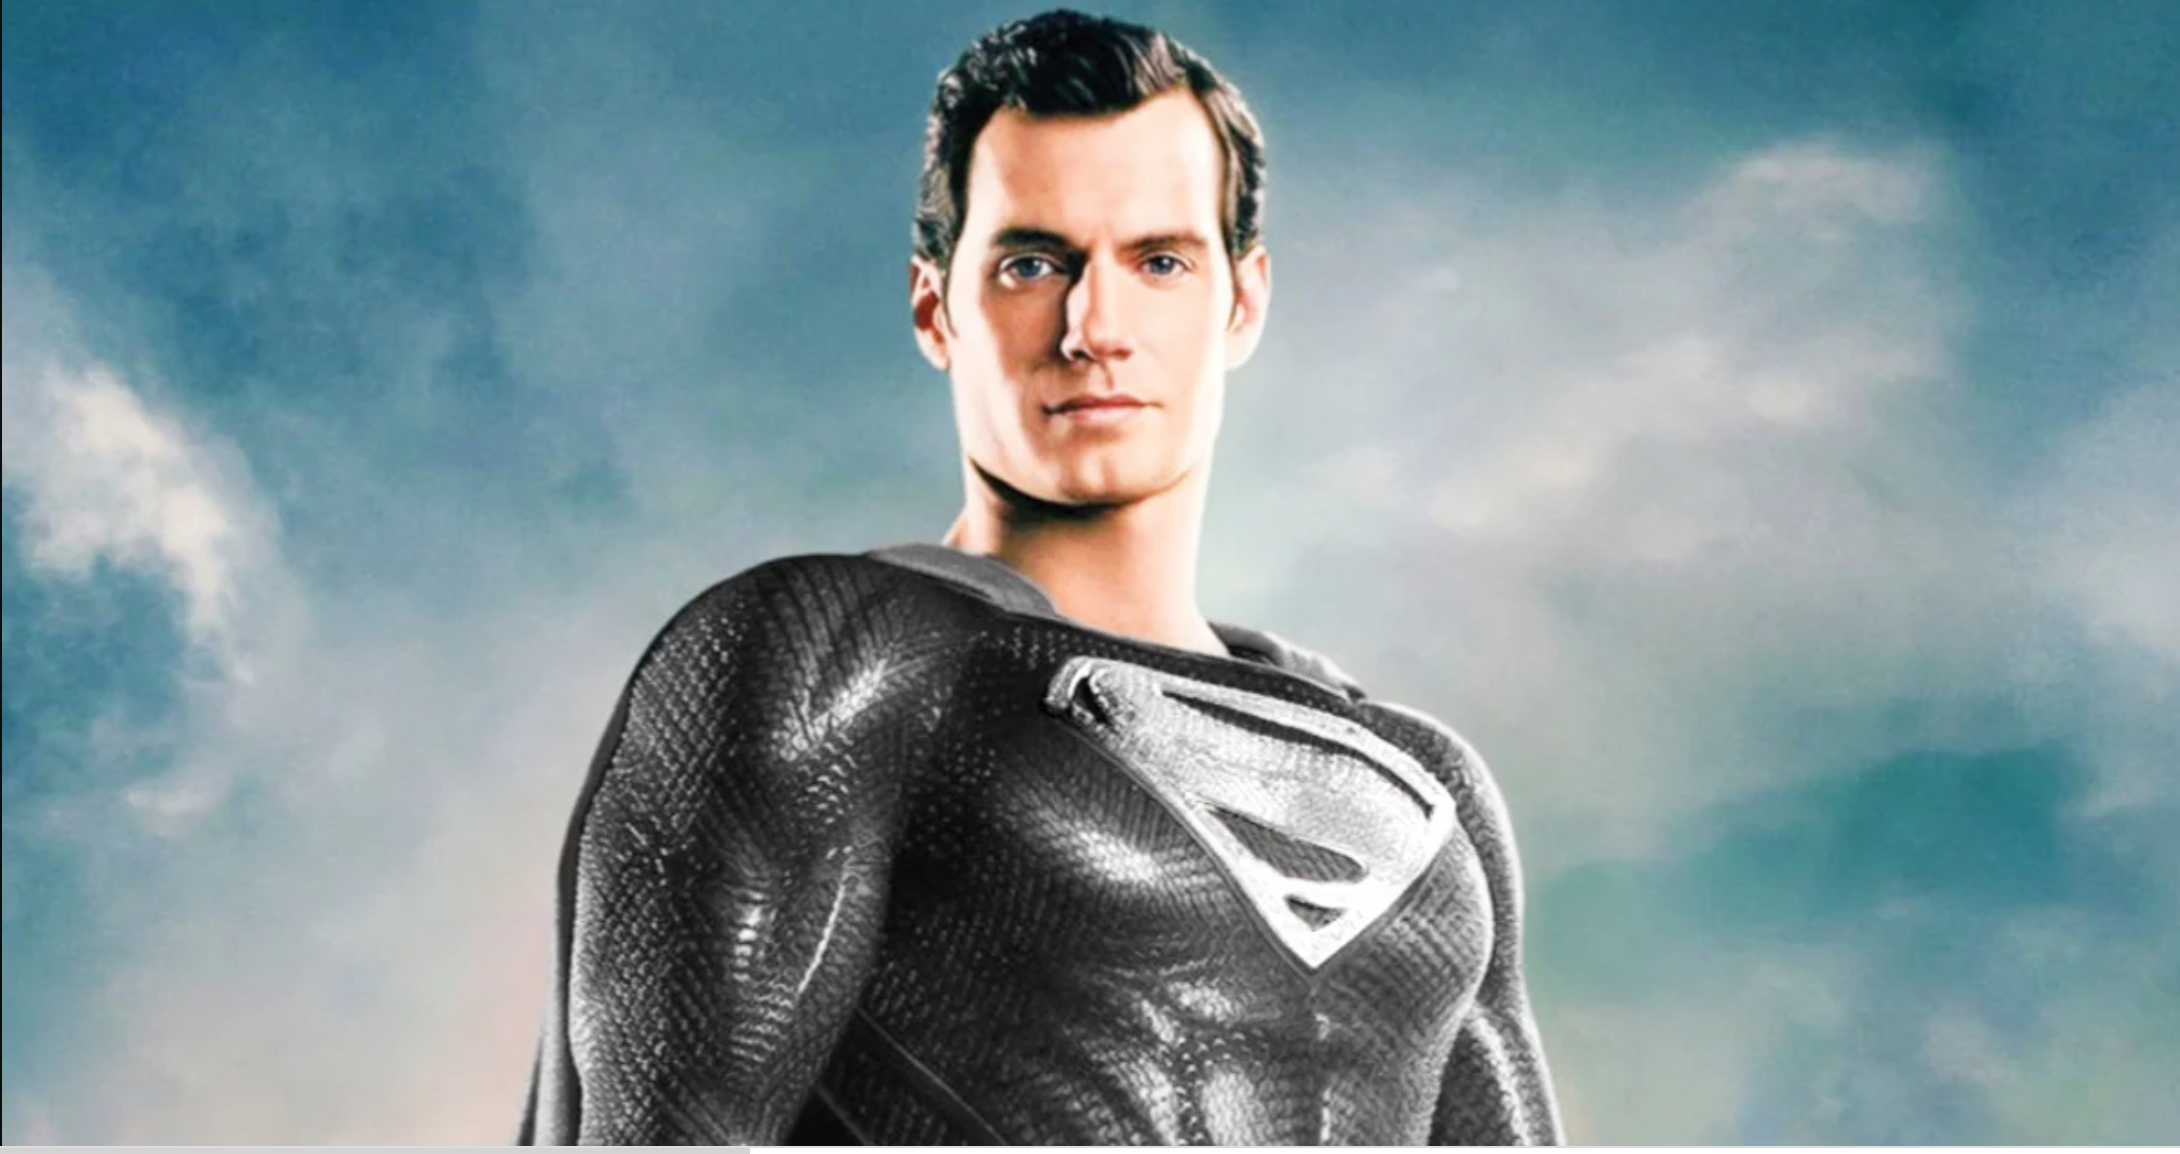 Man of Steel' Review: Zack Snyder's Strenuously Revisionist Superhero Saga